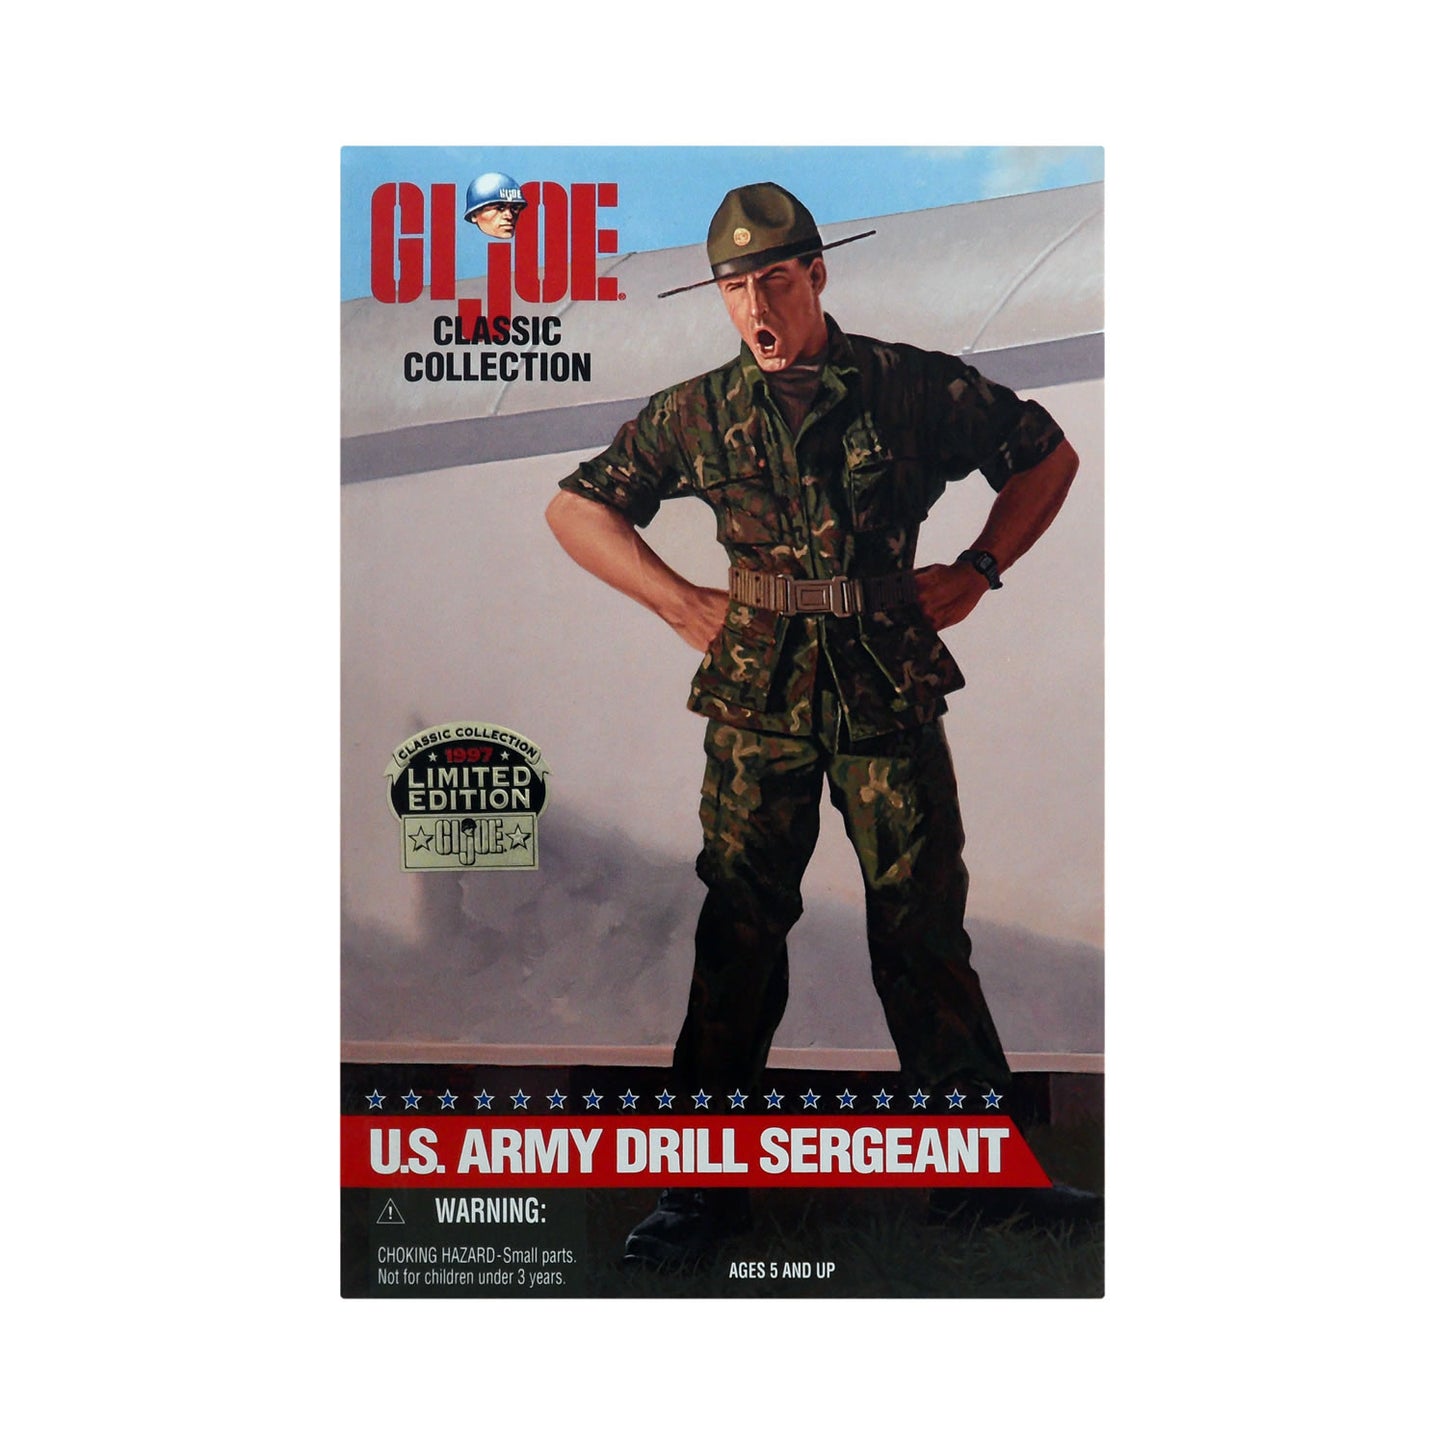 G.I. Joe Classic Collection U.S. Army Drill Sergeant (African-American)